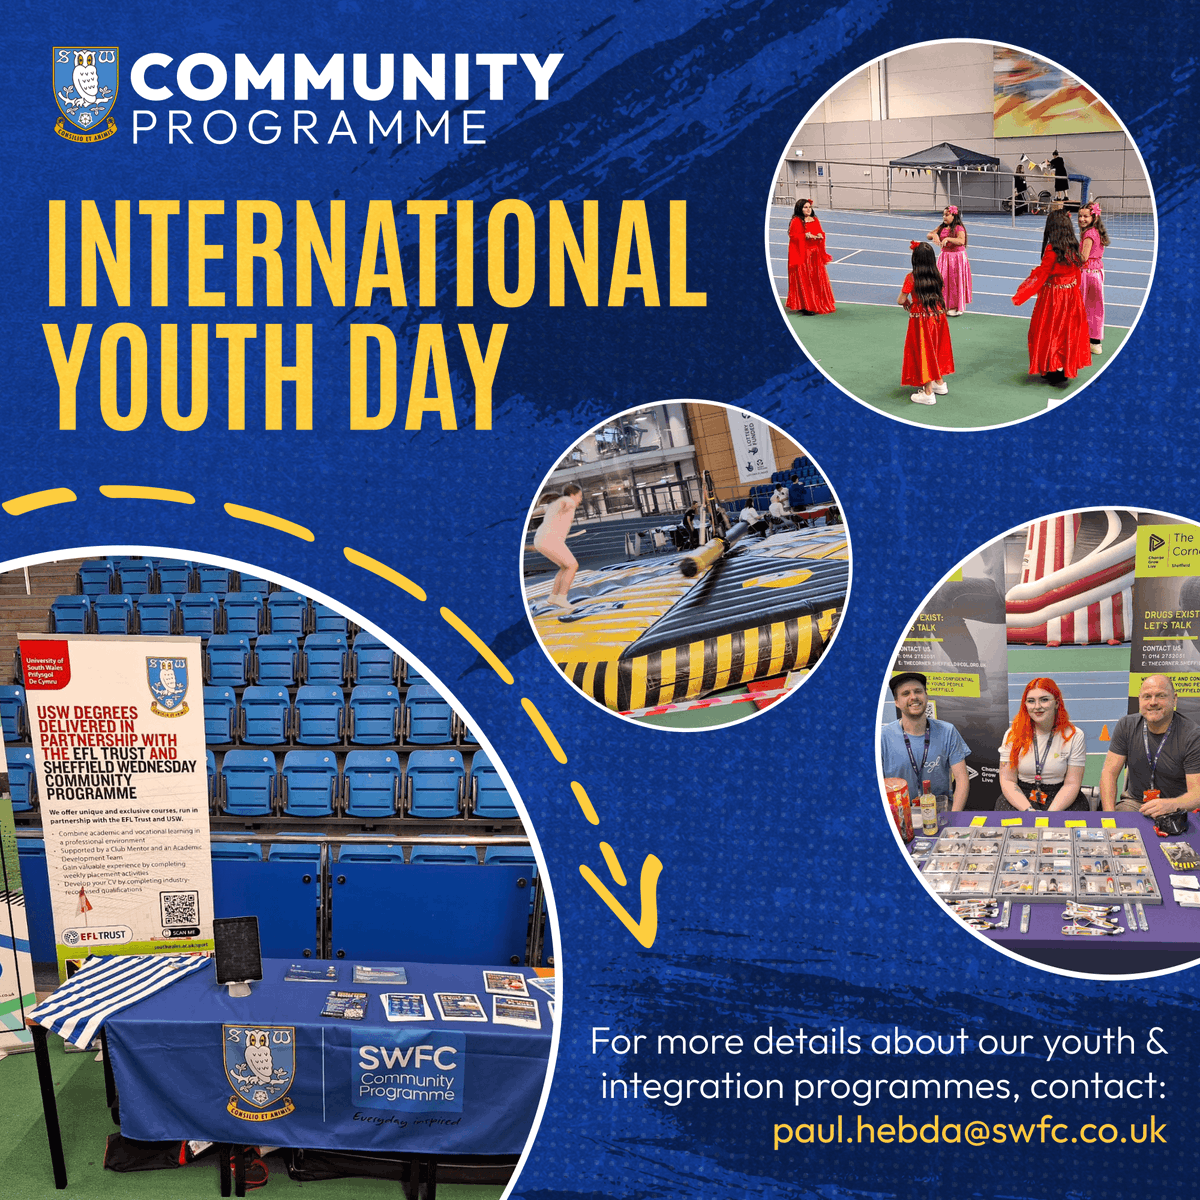 Come and say hello 👋 to us today at @eissheff, where we're engaging with young people and local partners for #InternationalYouthDay 🙌

#YoungResidents #InternationalYouthDay2023 #SheffieldFutures #Door43